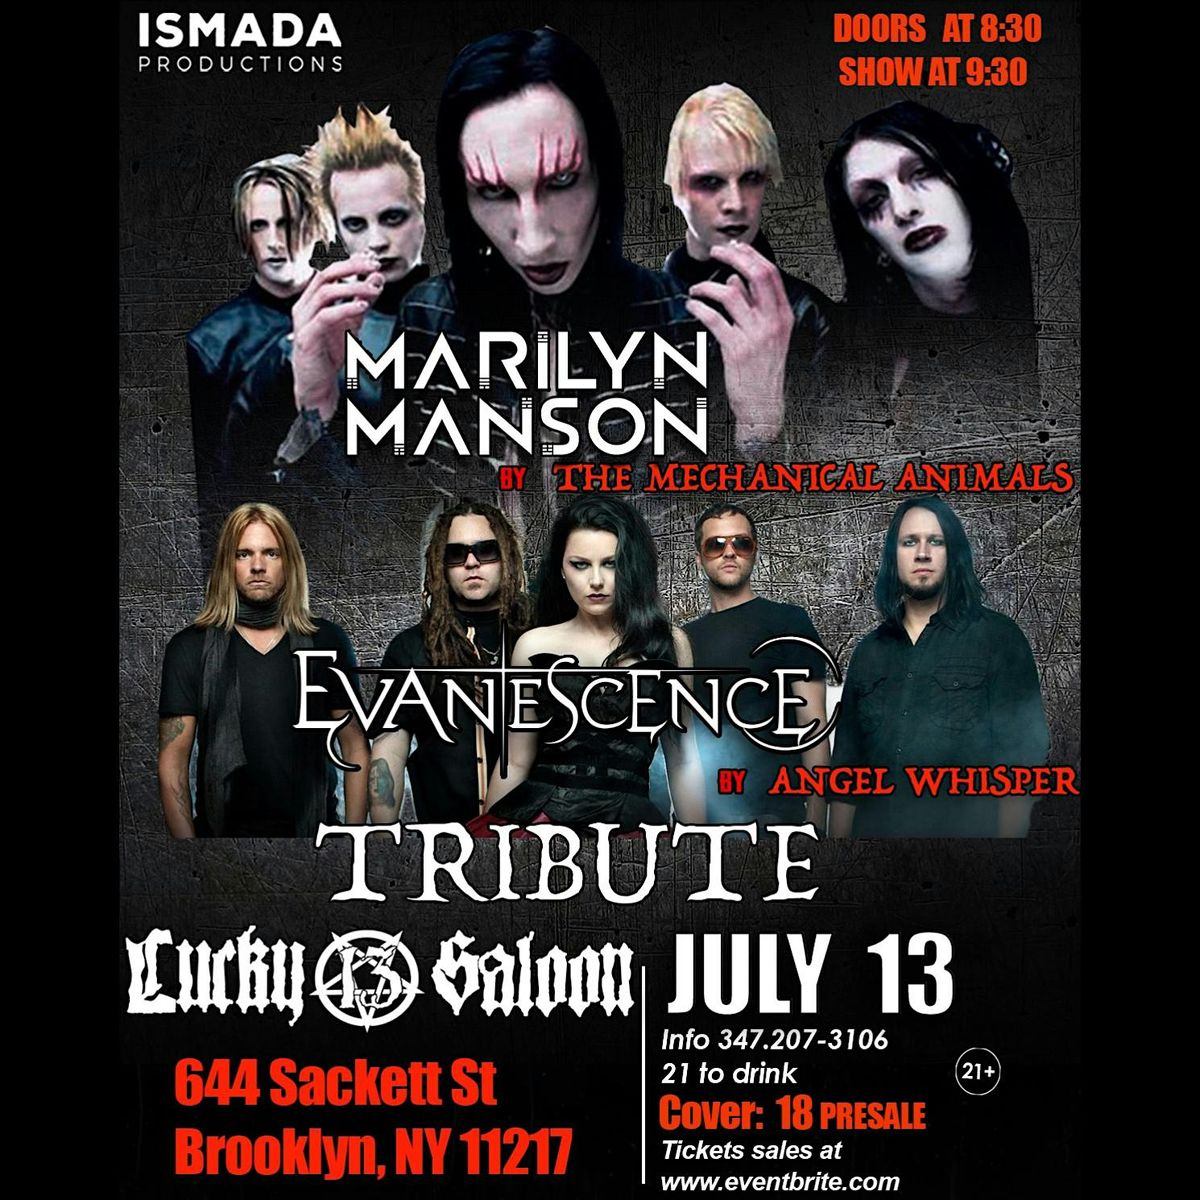 Marilyn Manson and Evanescence Tribute